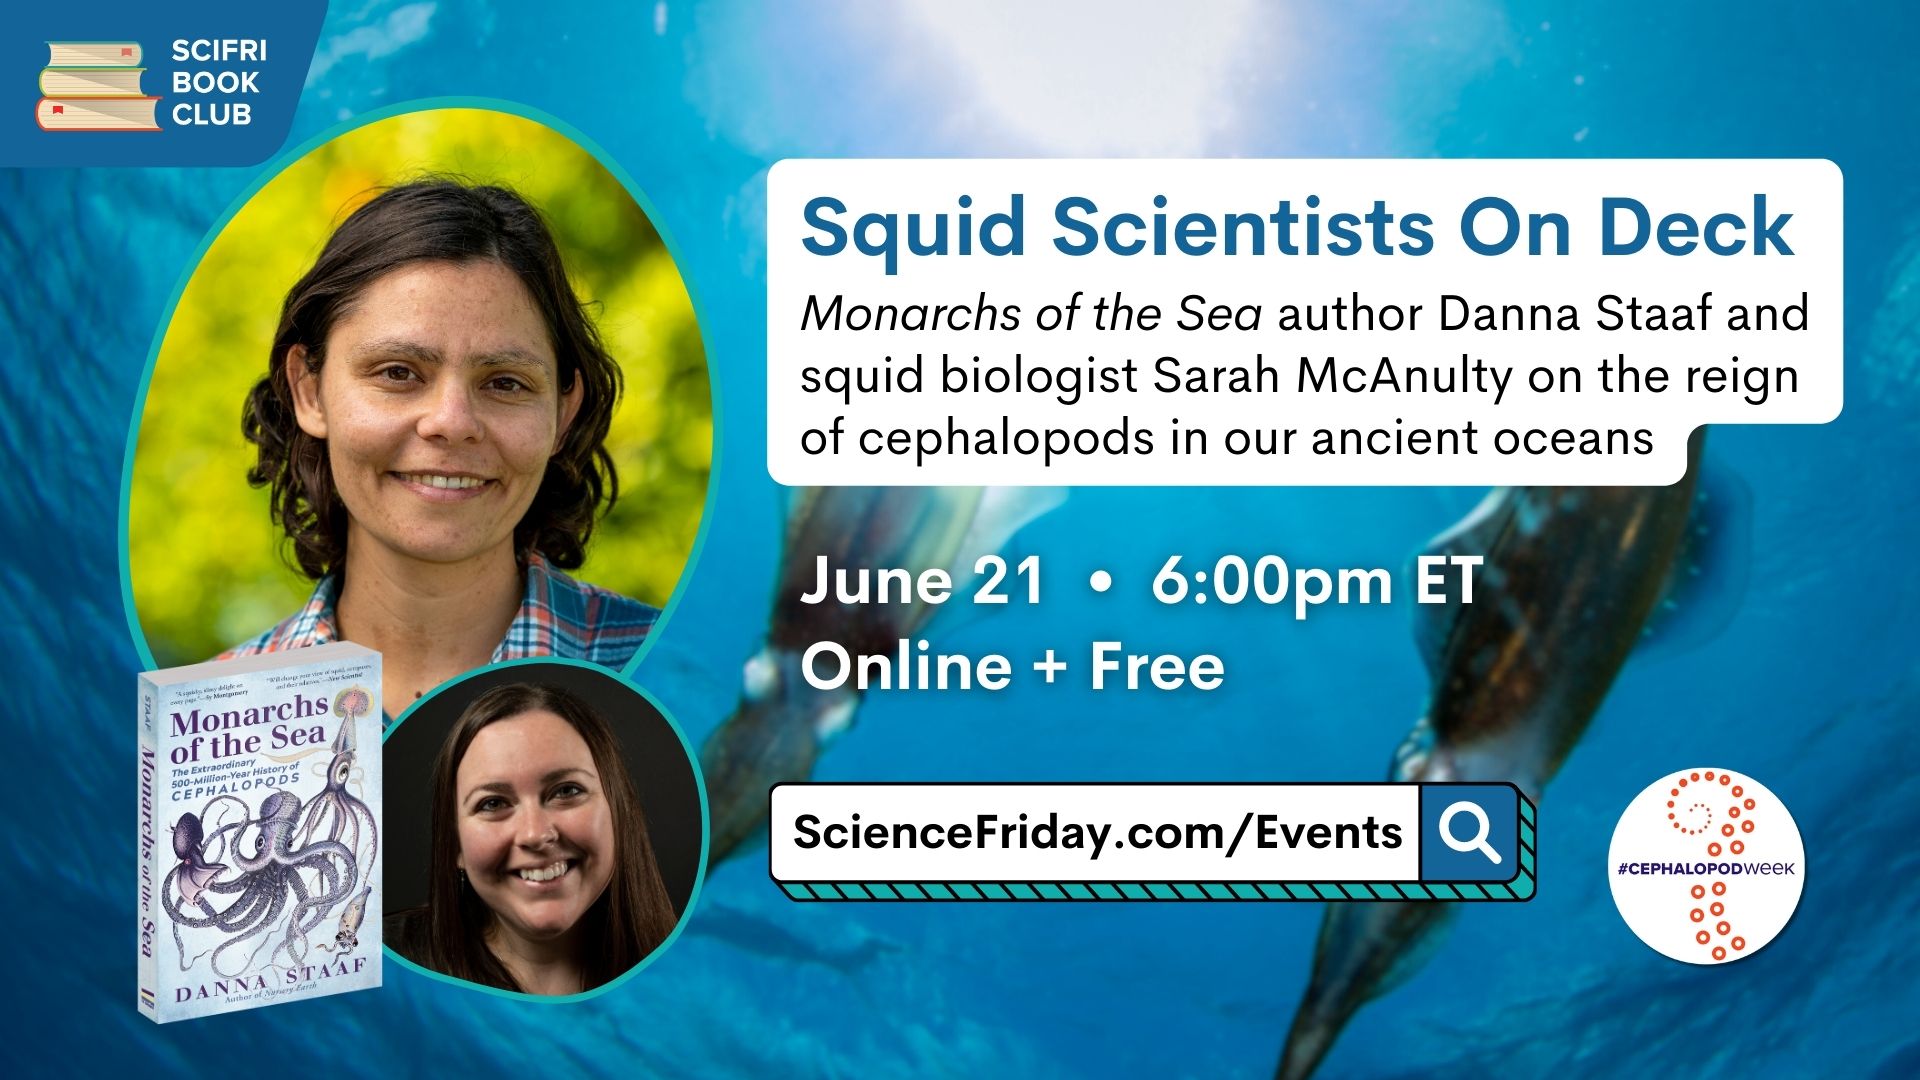 Event promotional image. In top left corner, SciFri Book Club logo, with event info below, which reads: Squid Scientists On Deck: Monarchs of the Sea author Danna Staaf and squid biologist Sarah McAnulty on the reign of cephalopods in our ancient oceans. June 21, 6:00pm ET, Online + Free. To the right of the frame is a picture of MONARCHS OF THE SEA book cover and a headshot of author Danna Staaf above a smaller photo of squid biologist Sarah McAnulty